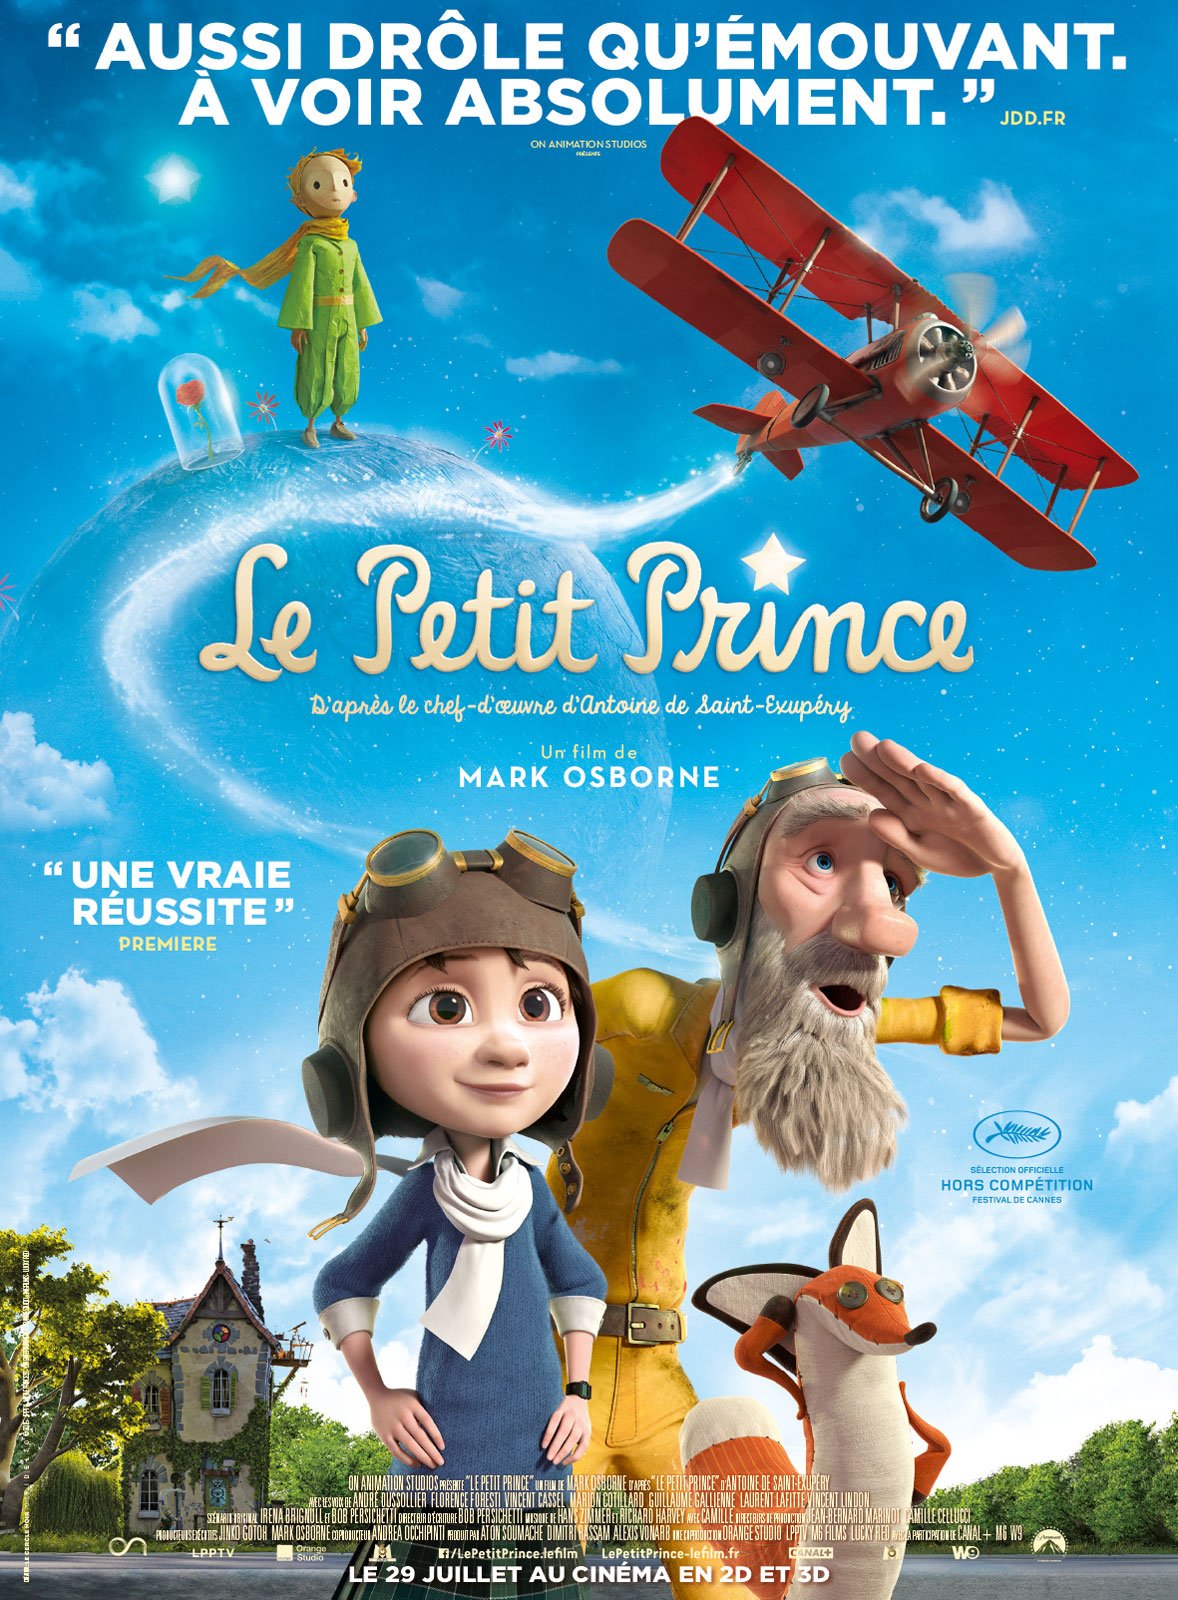 le petit prince movie download french